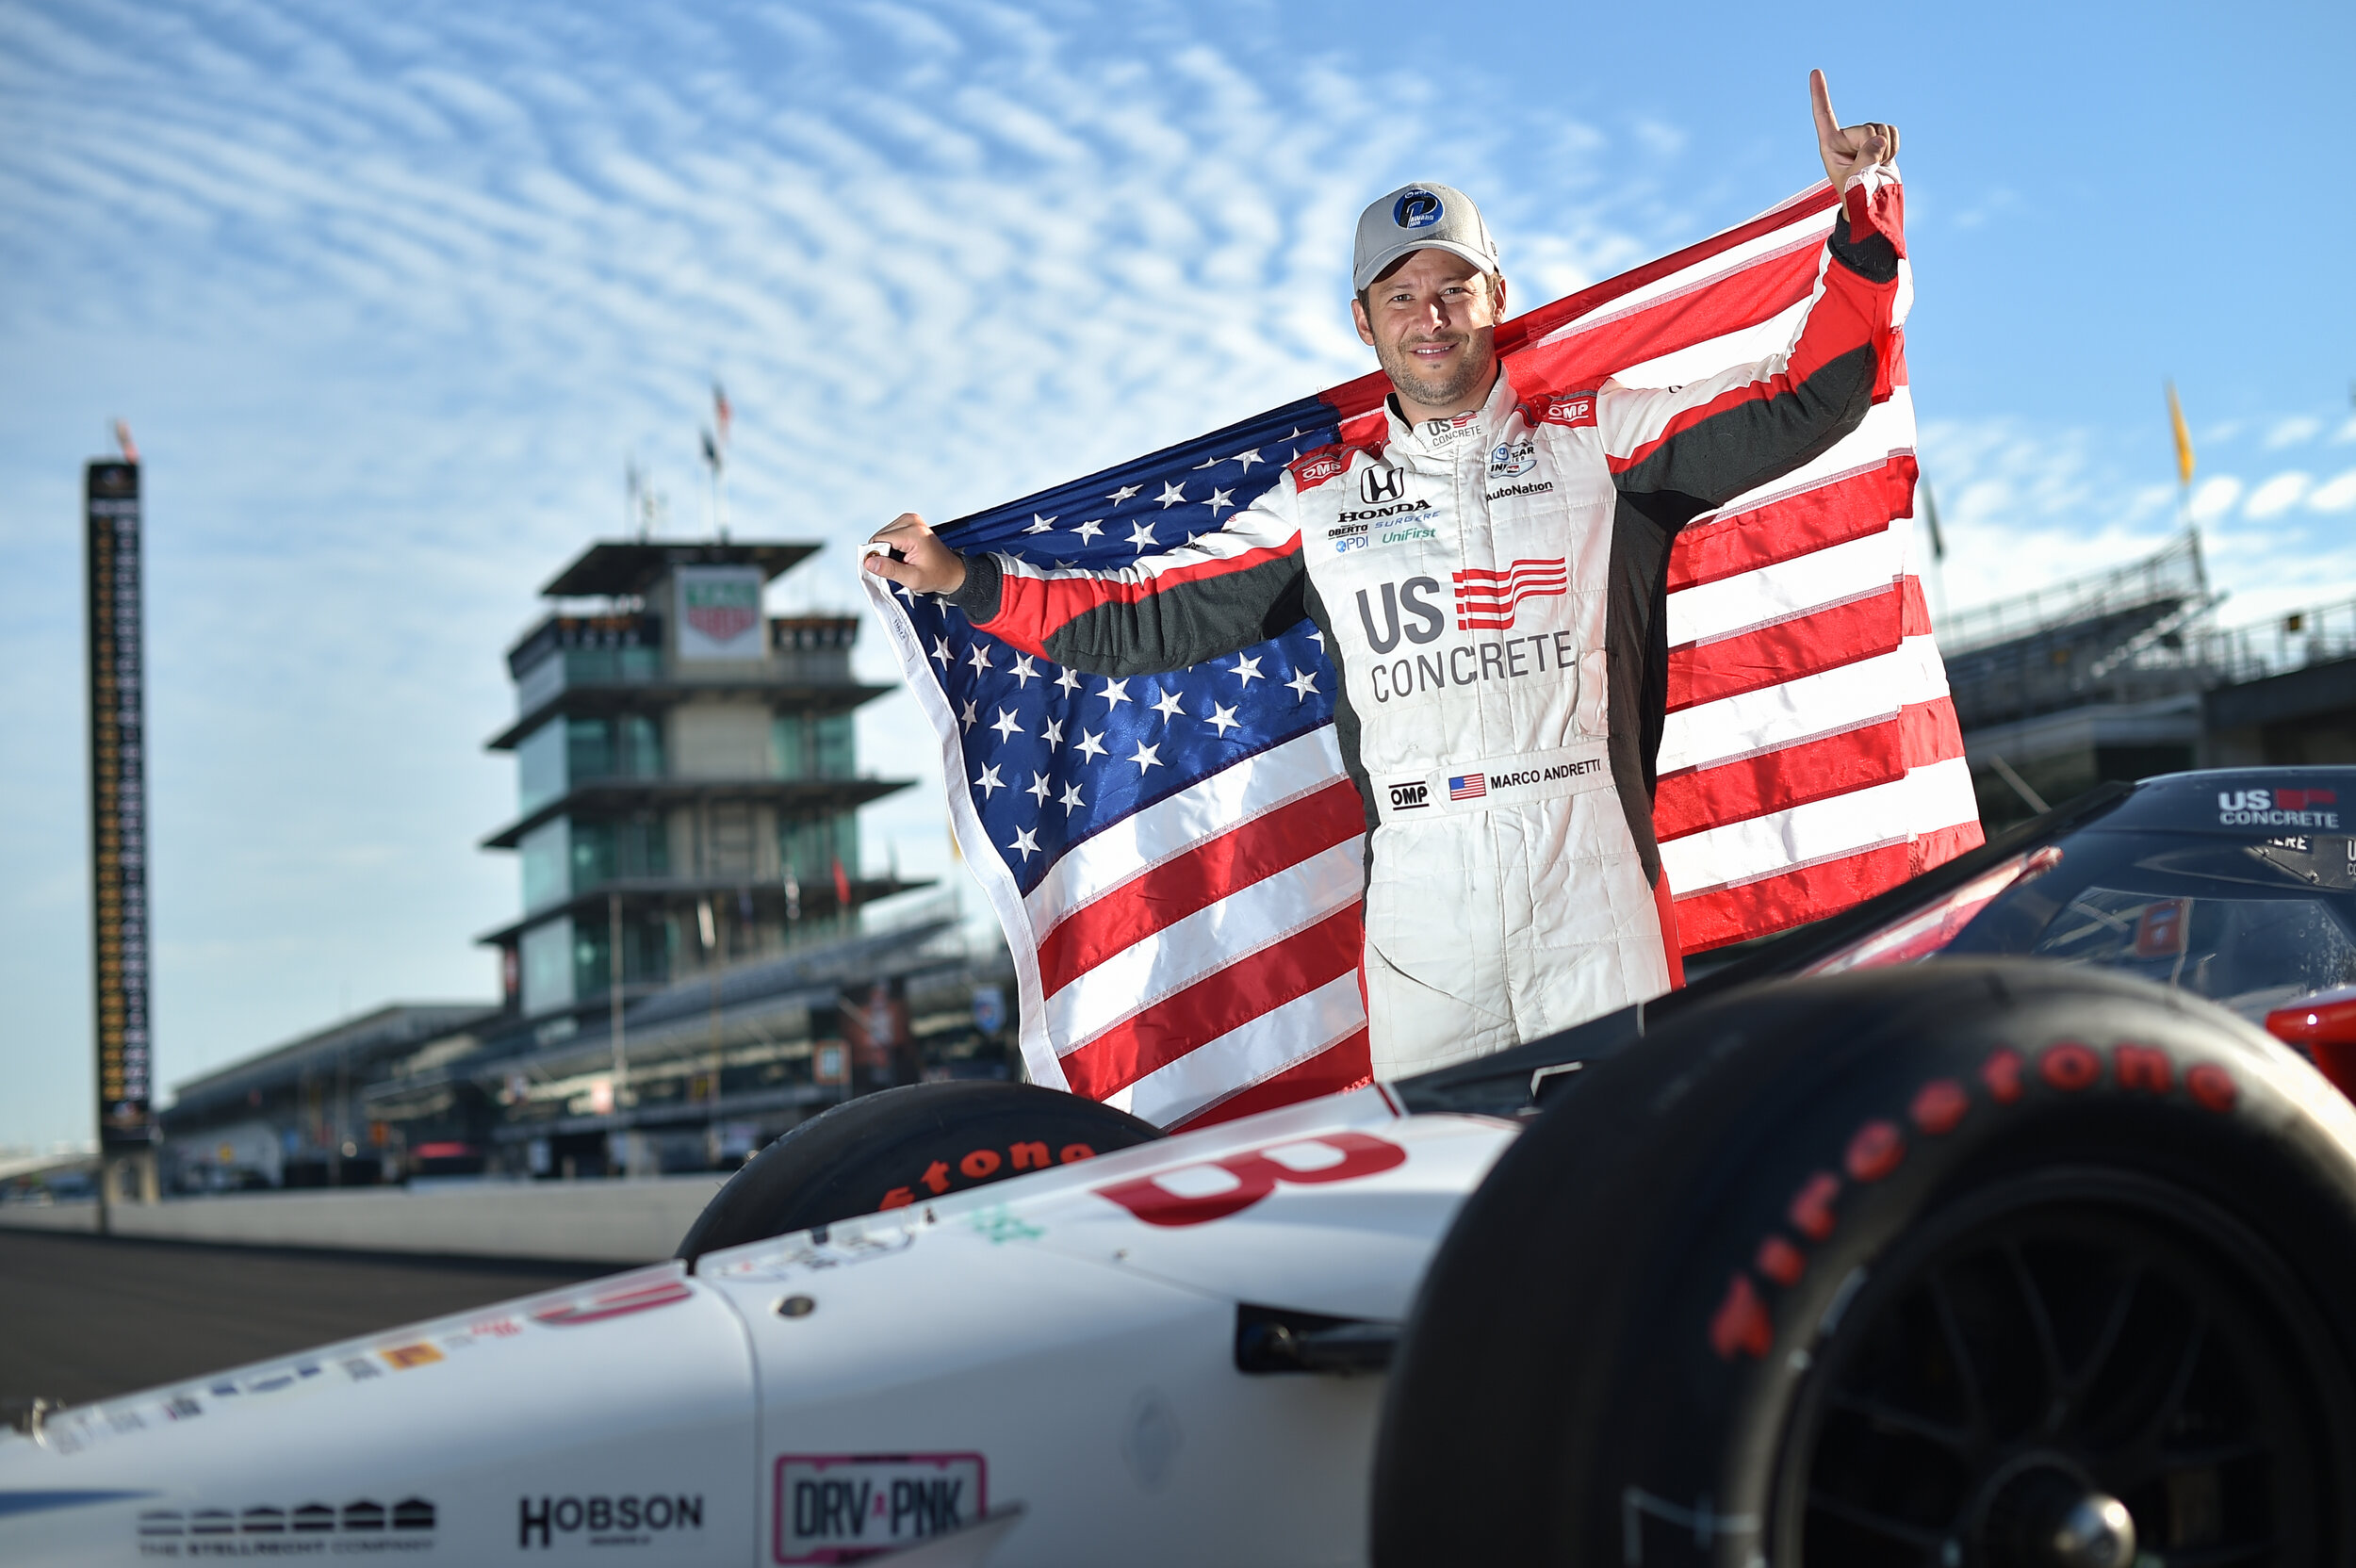 Marco Andretti on the Pole for the 2020 Indianapolis 500.